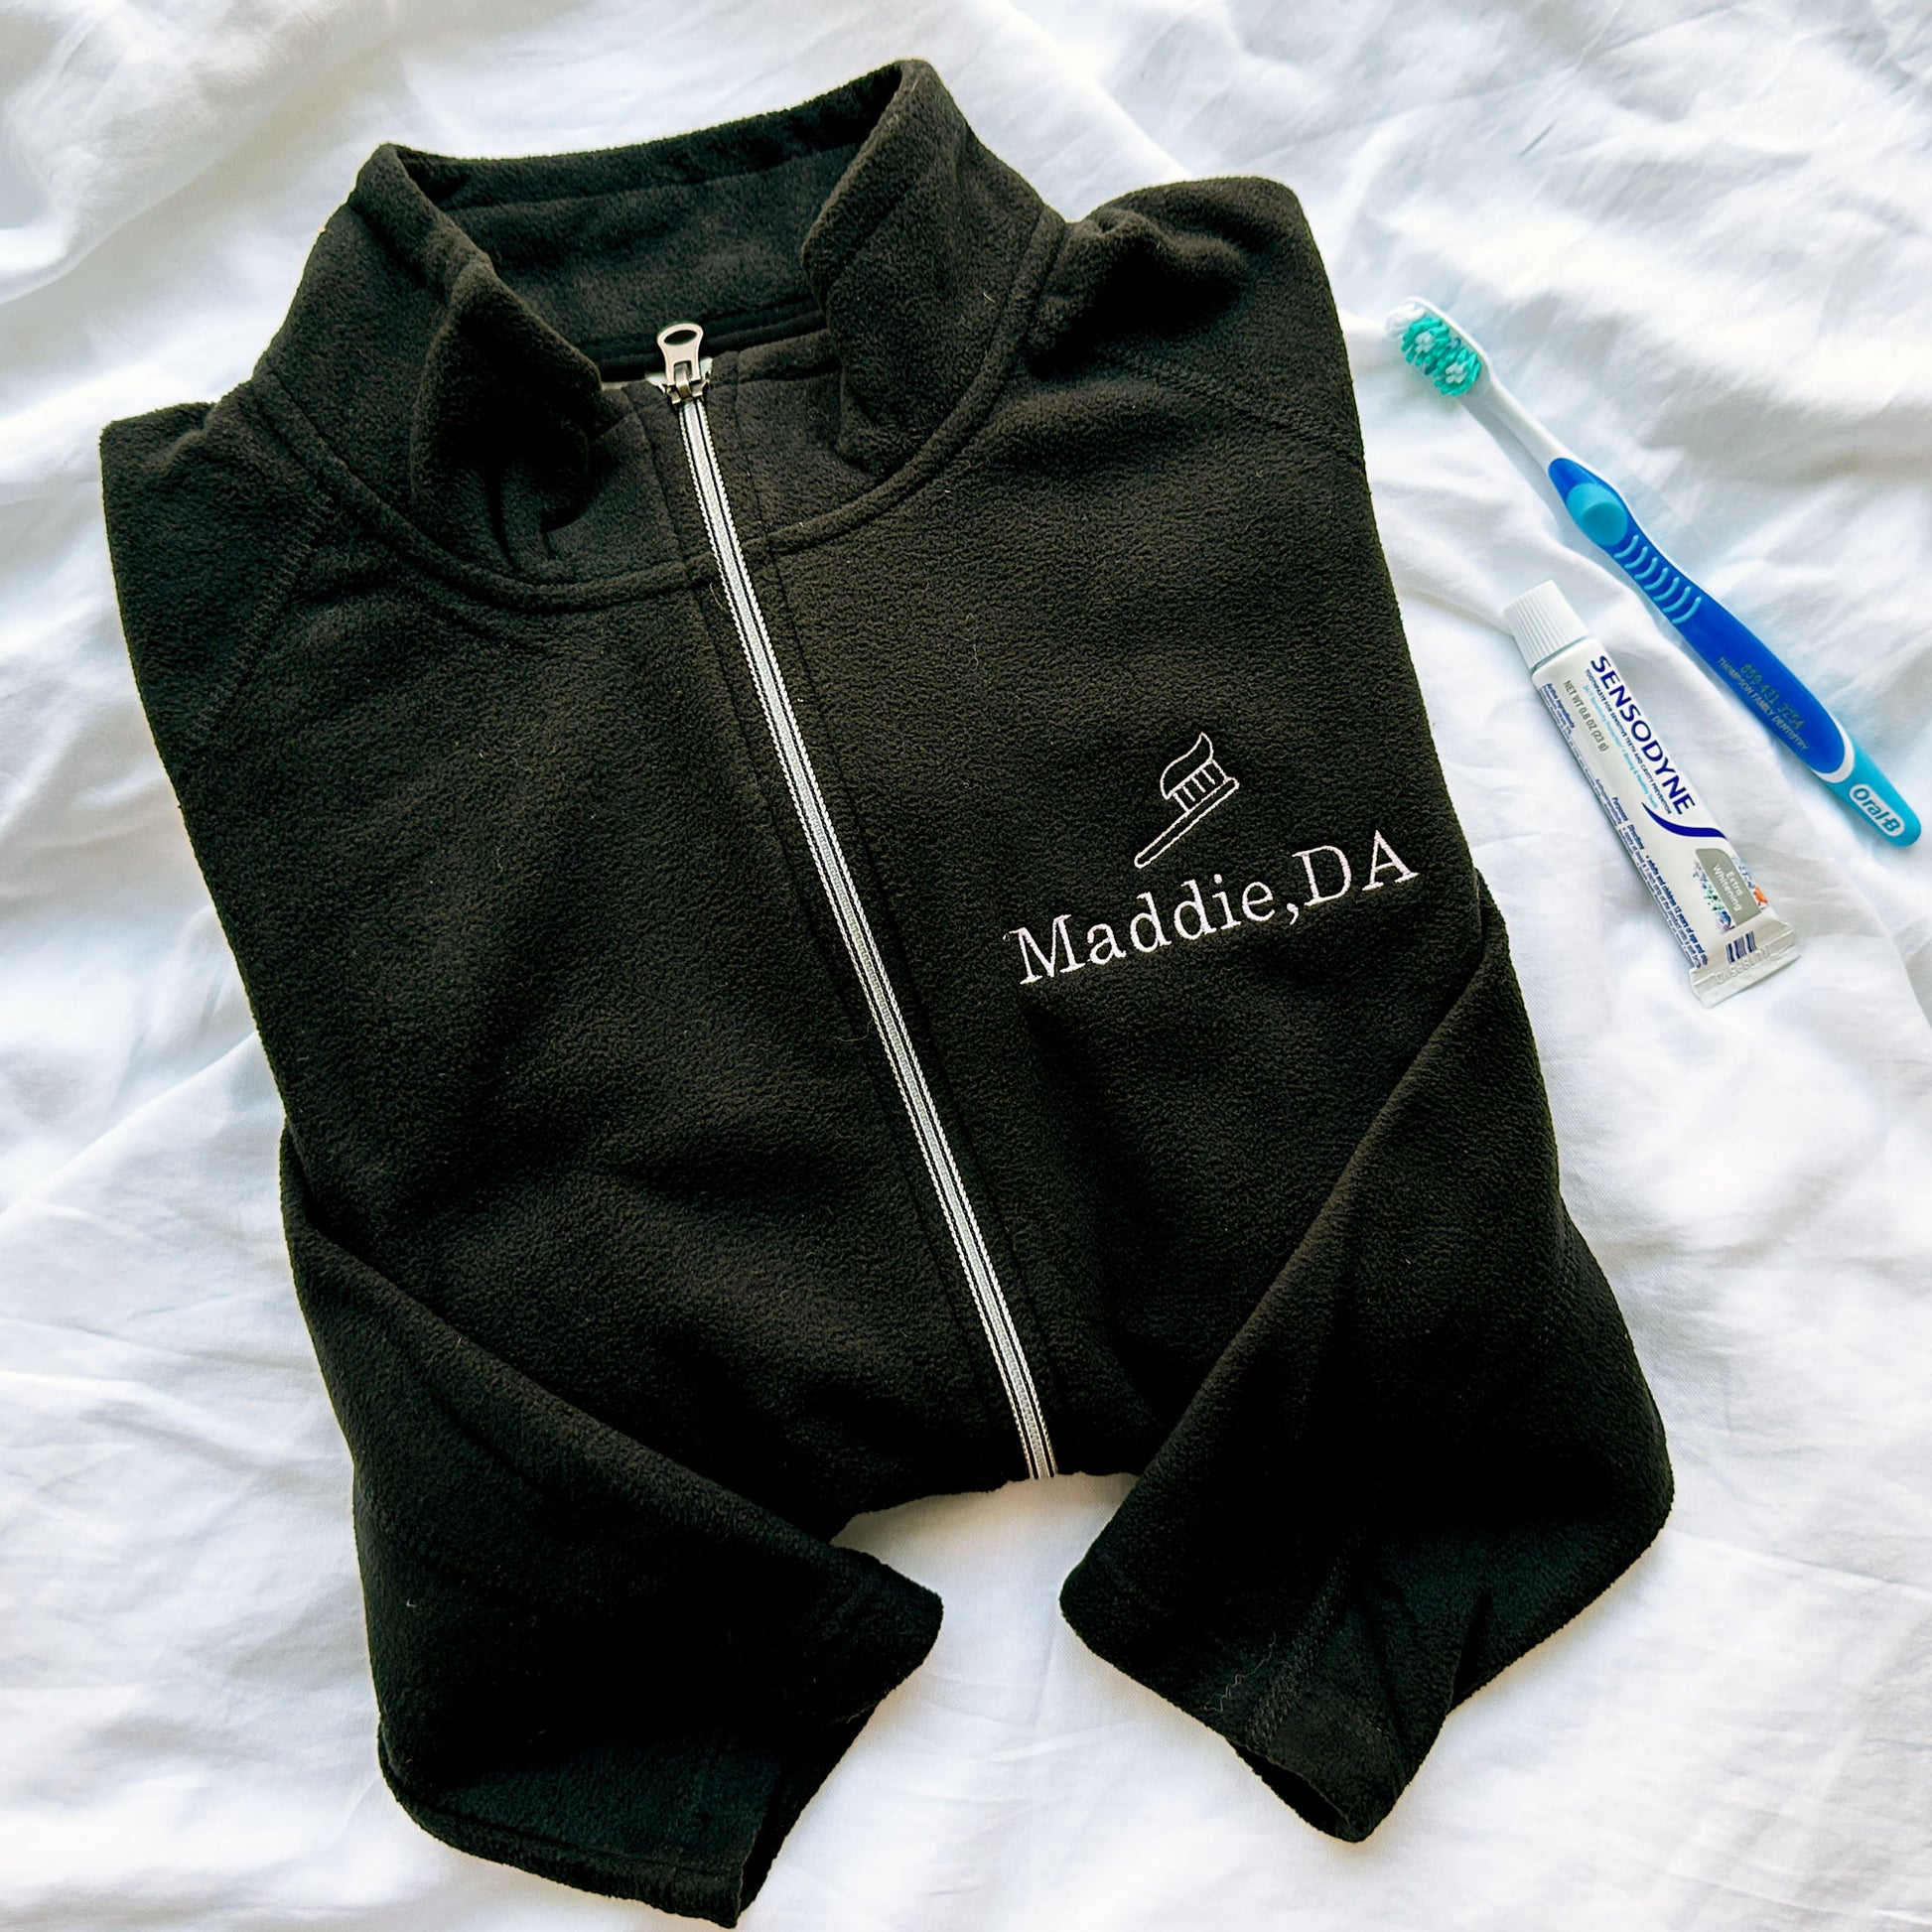 full zip fleece black jacket with mini embroidered toothbrush outline and name Maddie DA in lilac thread on the left chest